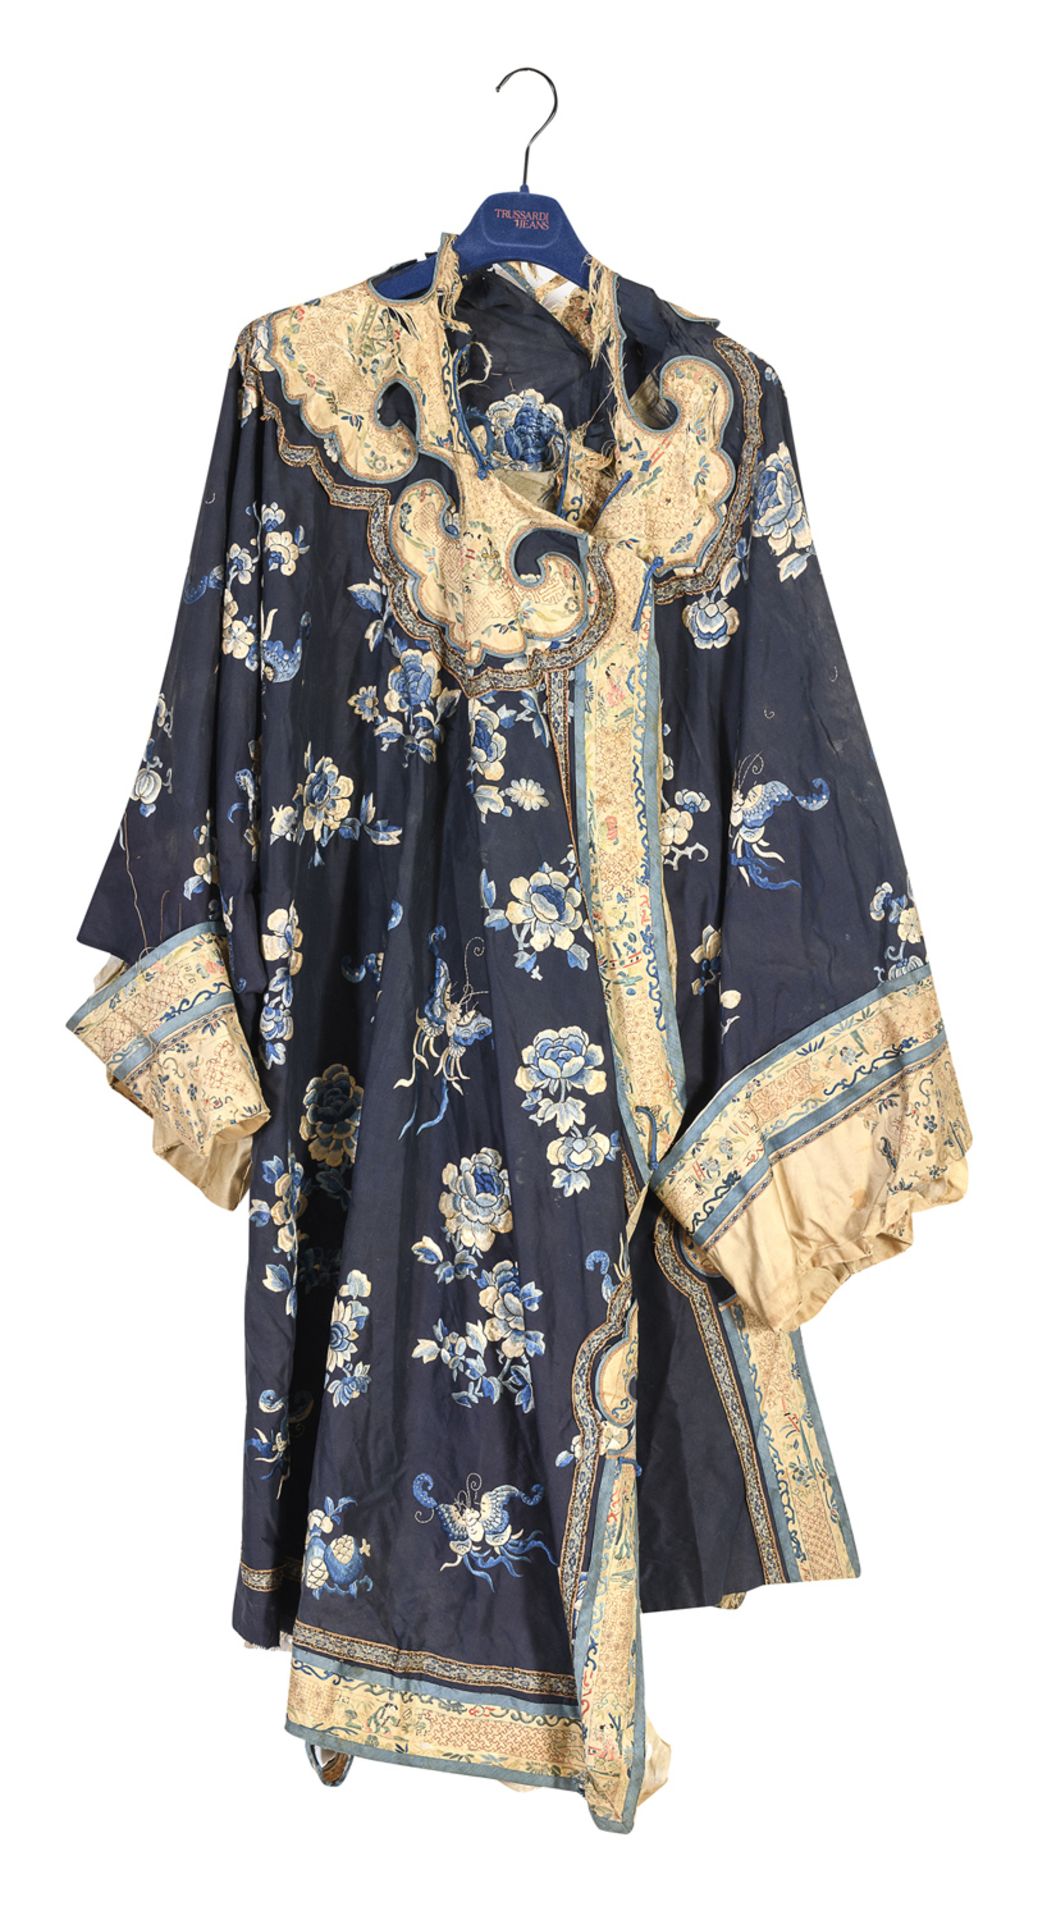 A CHINESE EMBROIDERED SILK DRESS FIRST HALF 20TH CENTURY.